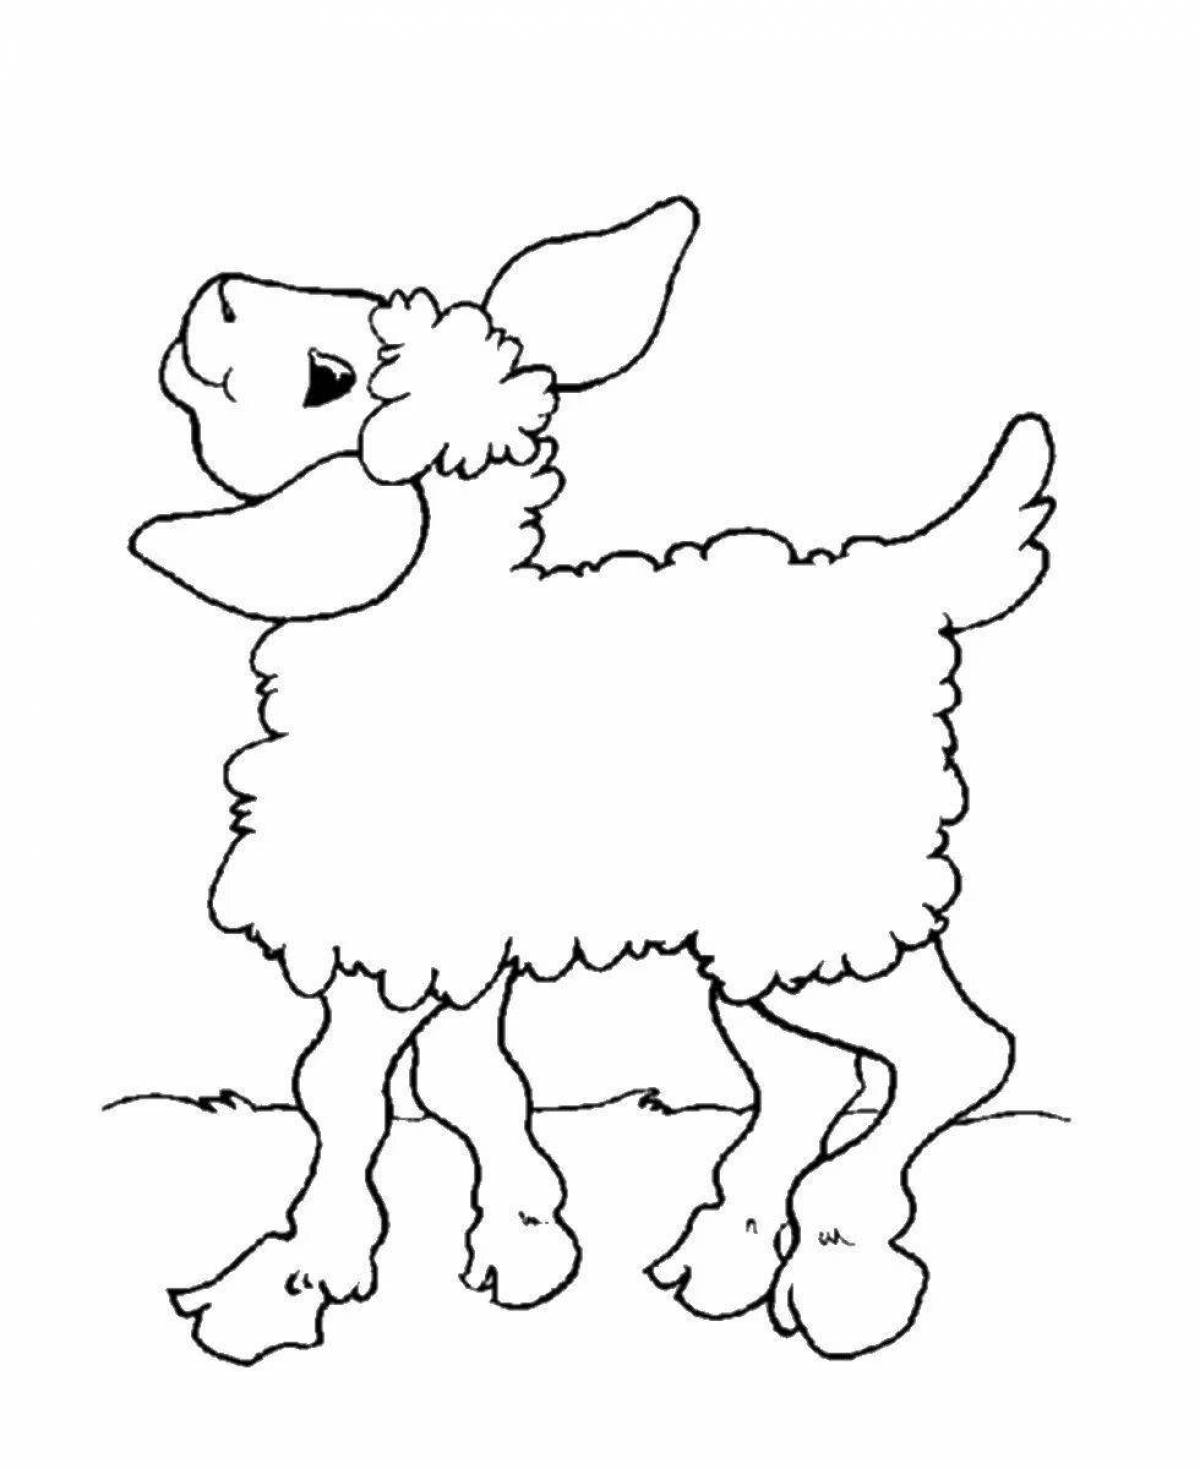 Witty lamb coloring book for kids